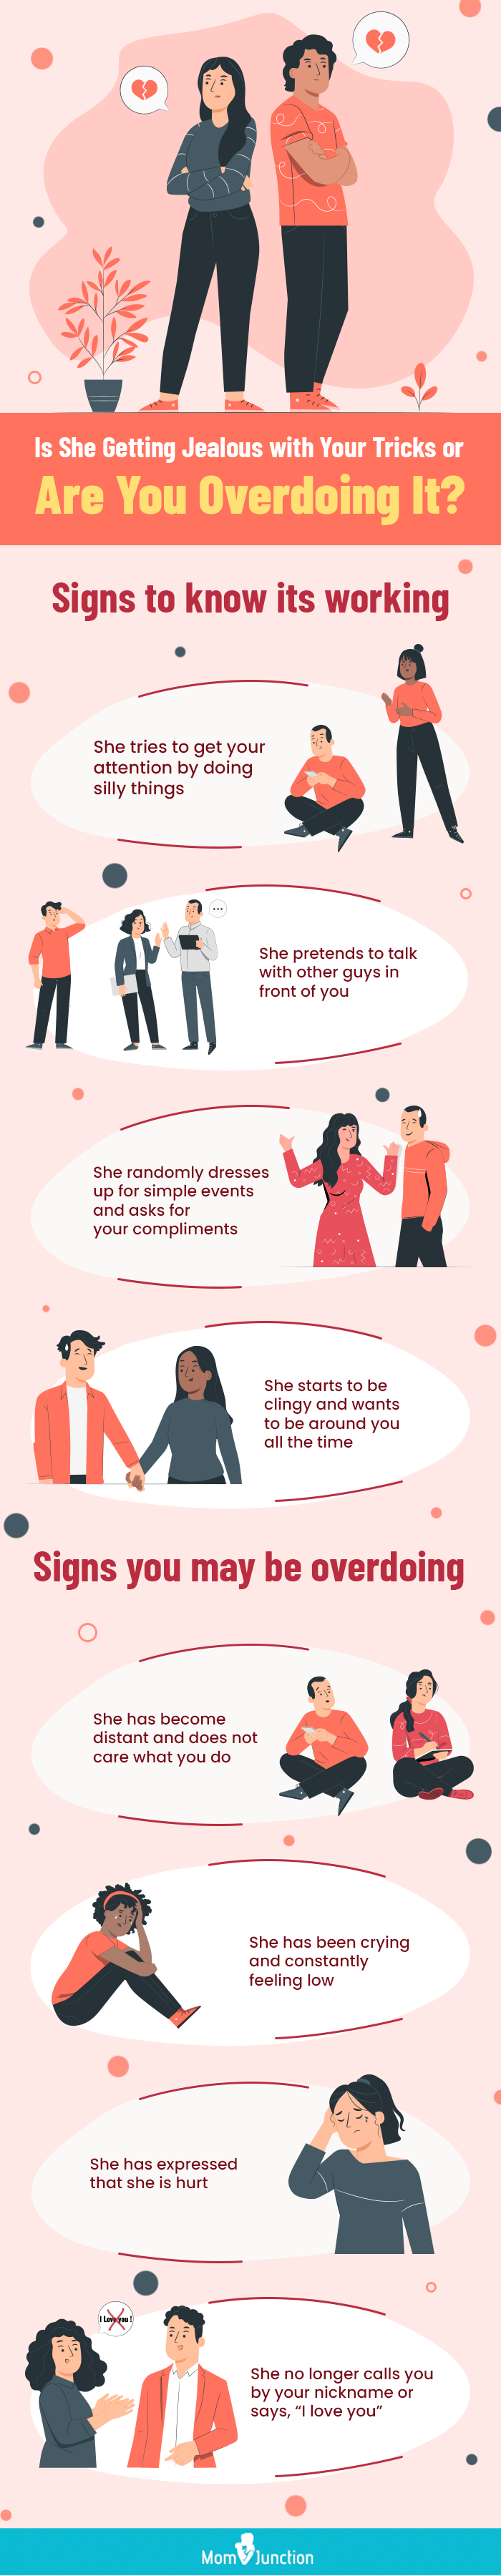 is she getting jealous of your tricks or are you overdoing it [infographic]